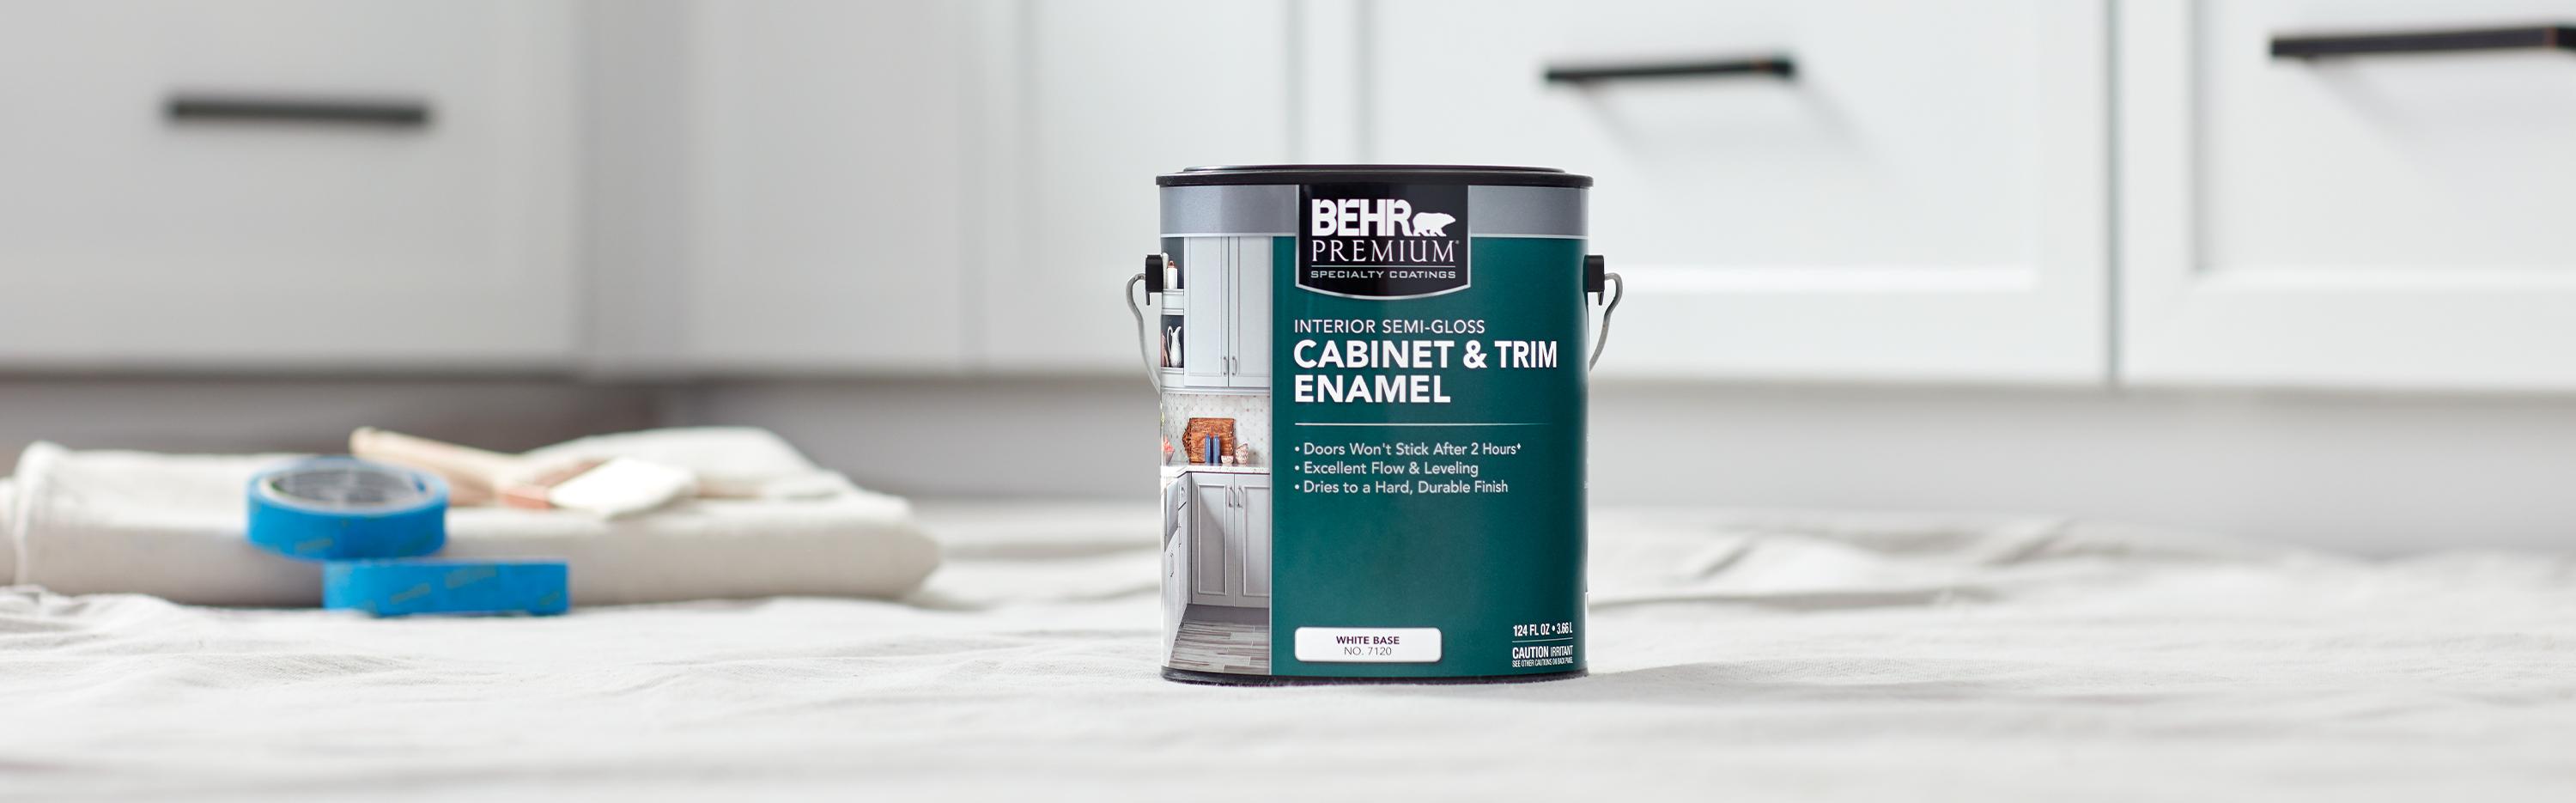 Can of Behr paint sitting on the floor